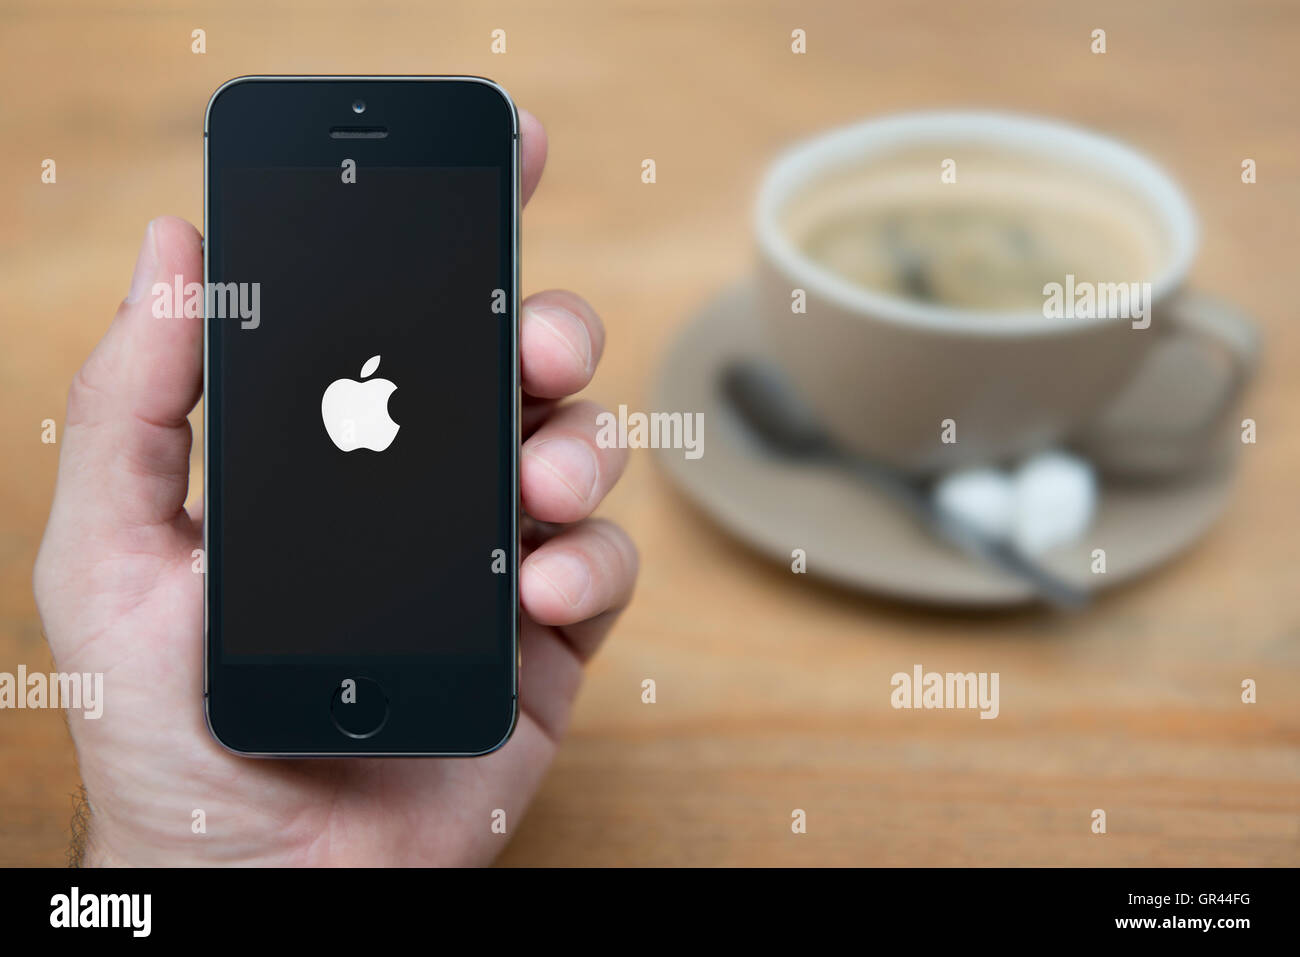 A man looks at his iPhone which displays the Apple logo on a black background, with a cup of coffee (Editorial use only). Stock Photo